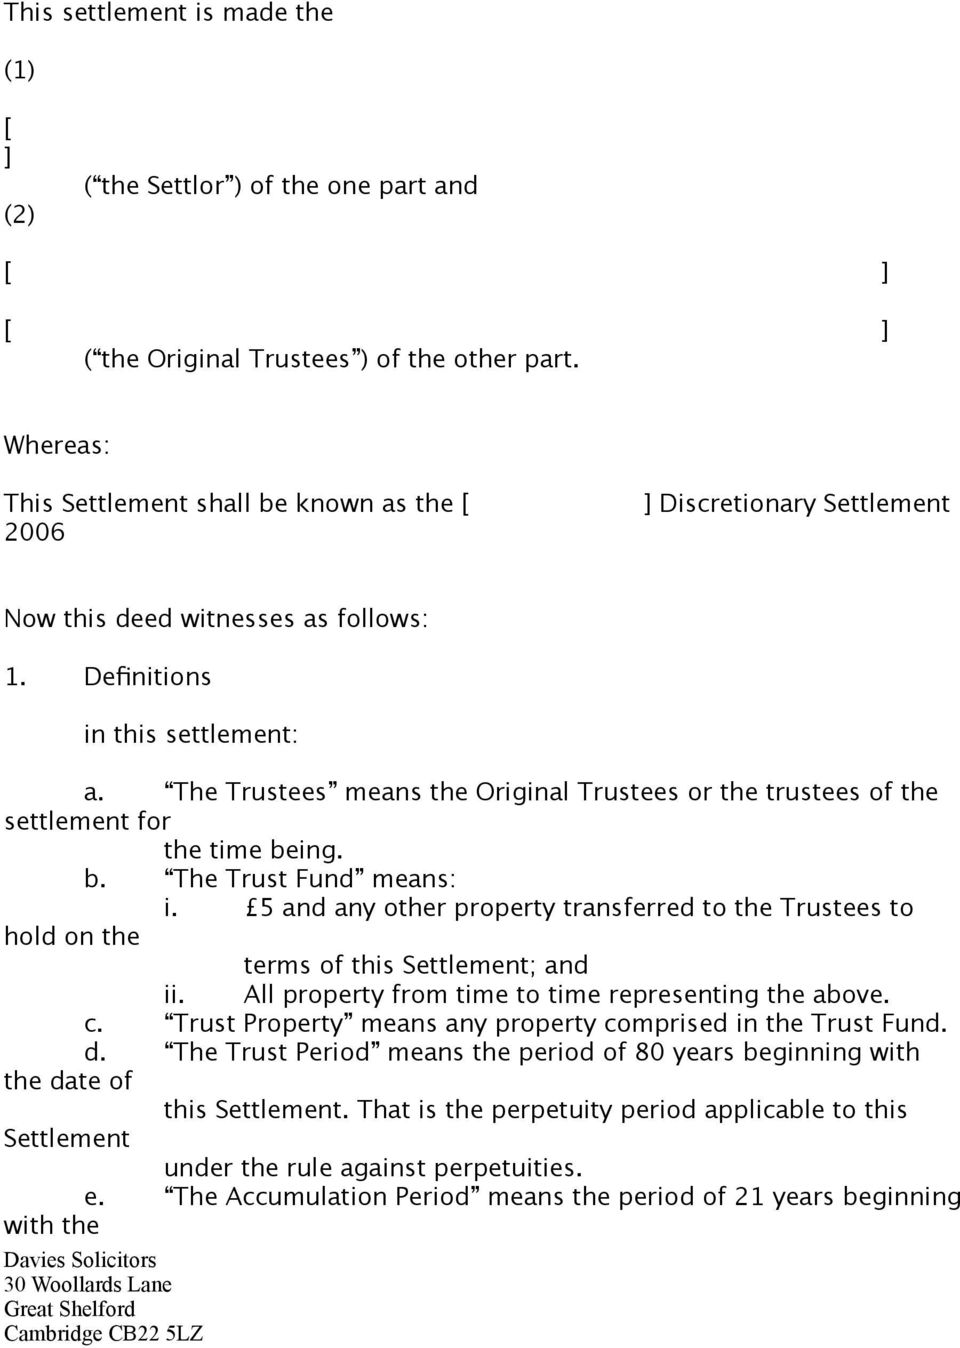 The Trustees means the Original Trustees or the trustees of the settlement for the time being. b. The Trust Fund means: i.